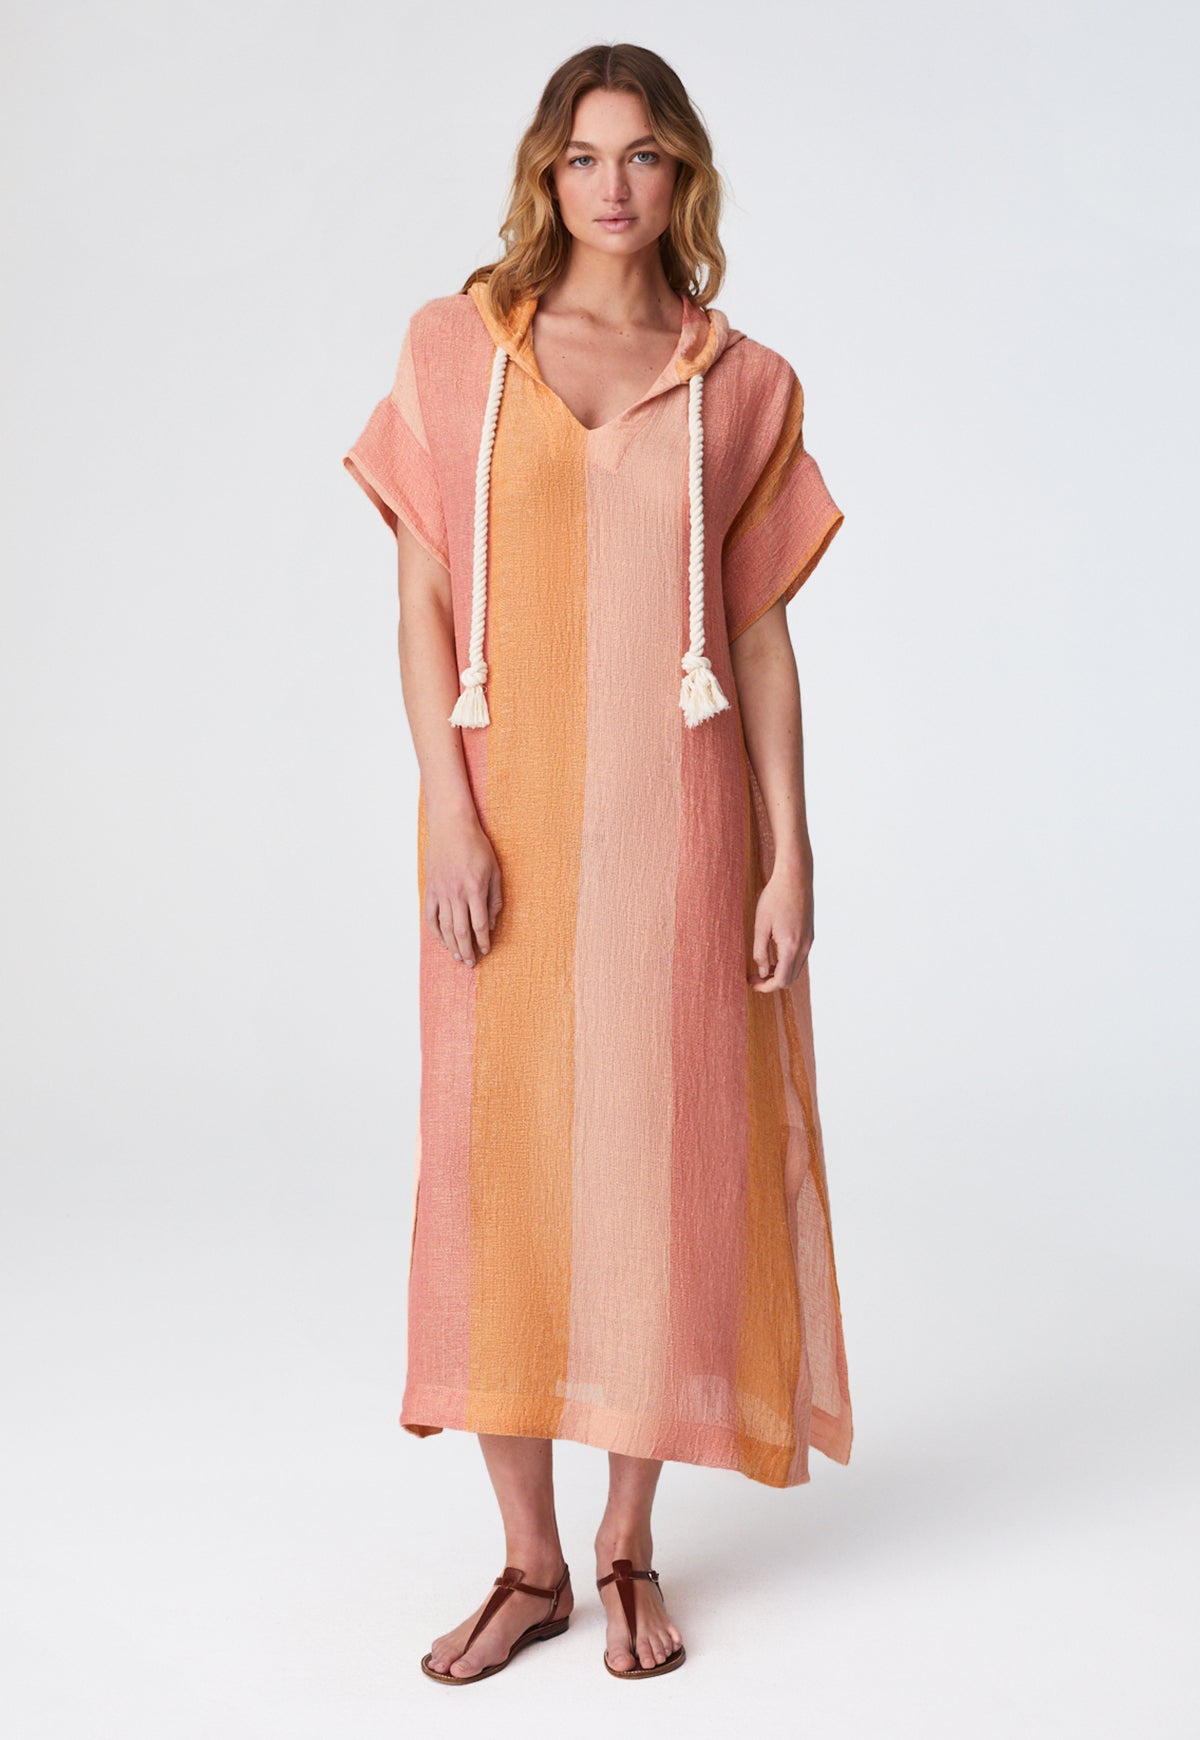 THE DRAWSTRING HOODED CAFTAN in SUNSET AWNING STRIPED GAUZE